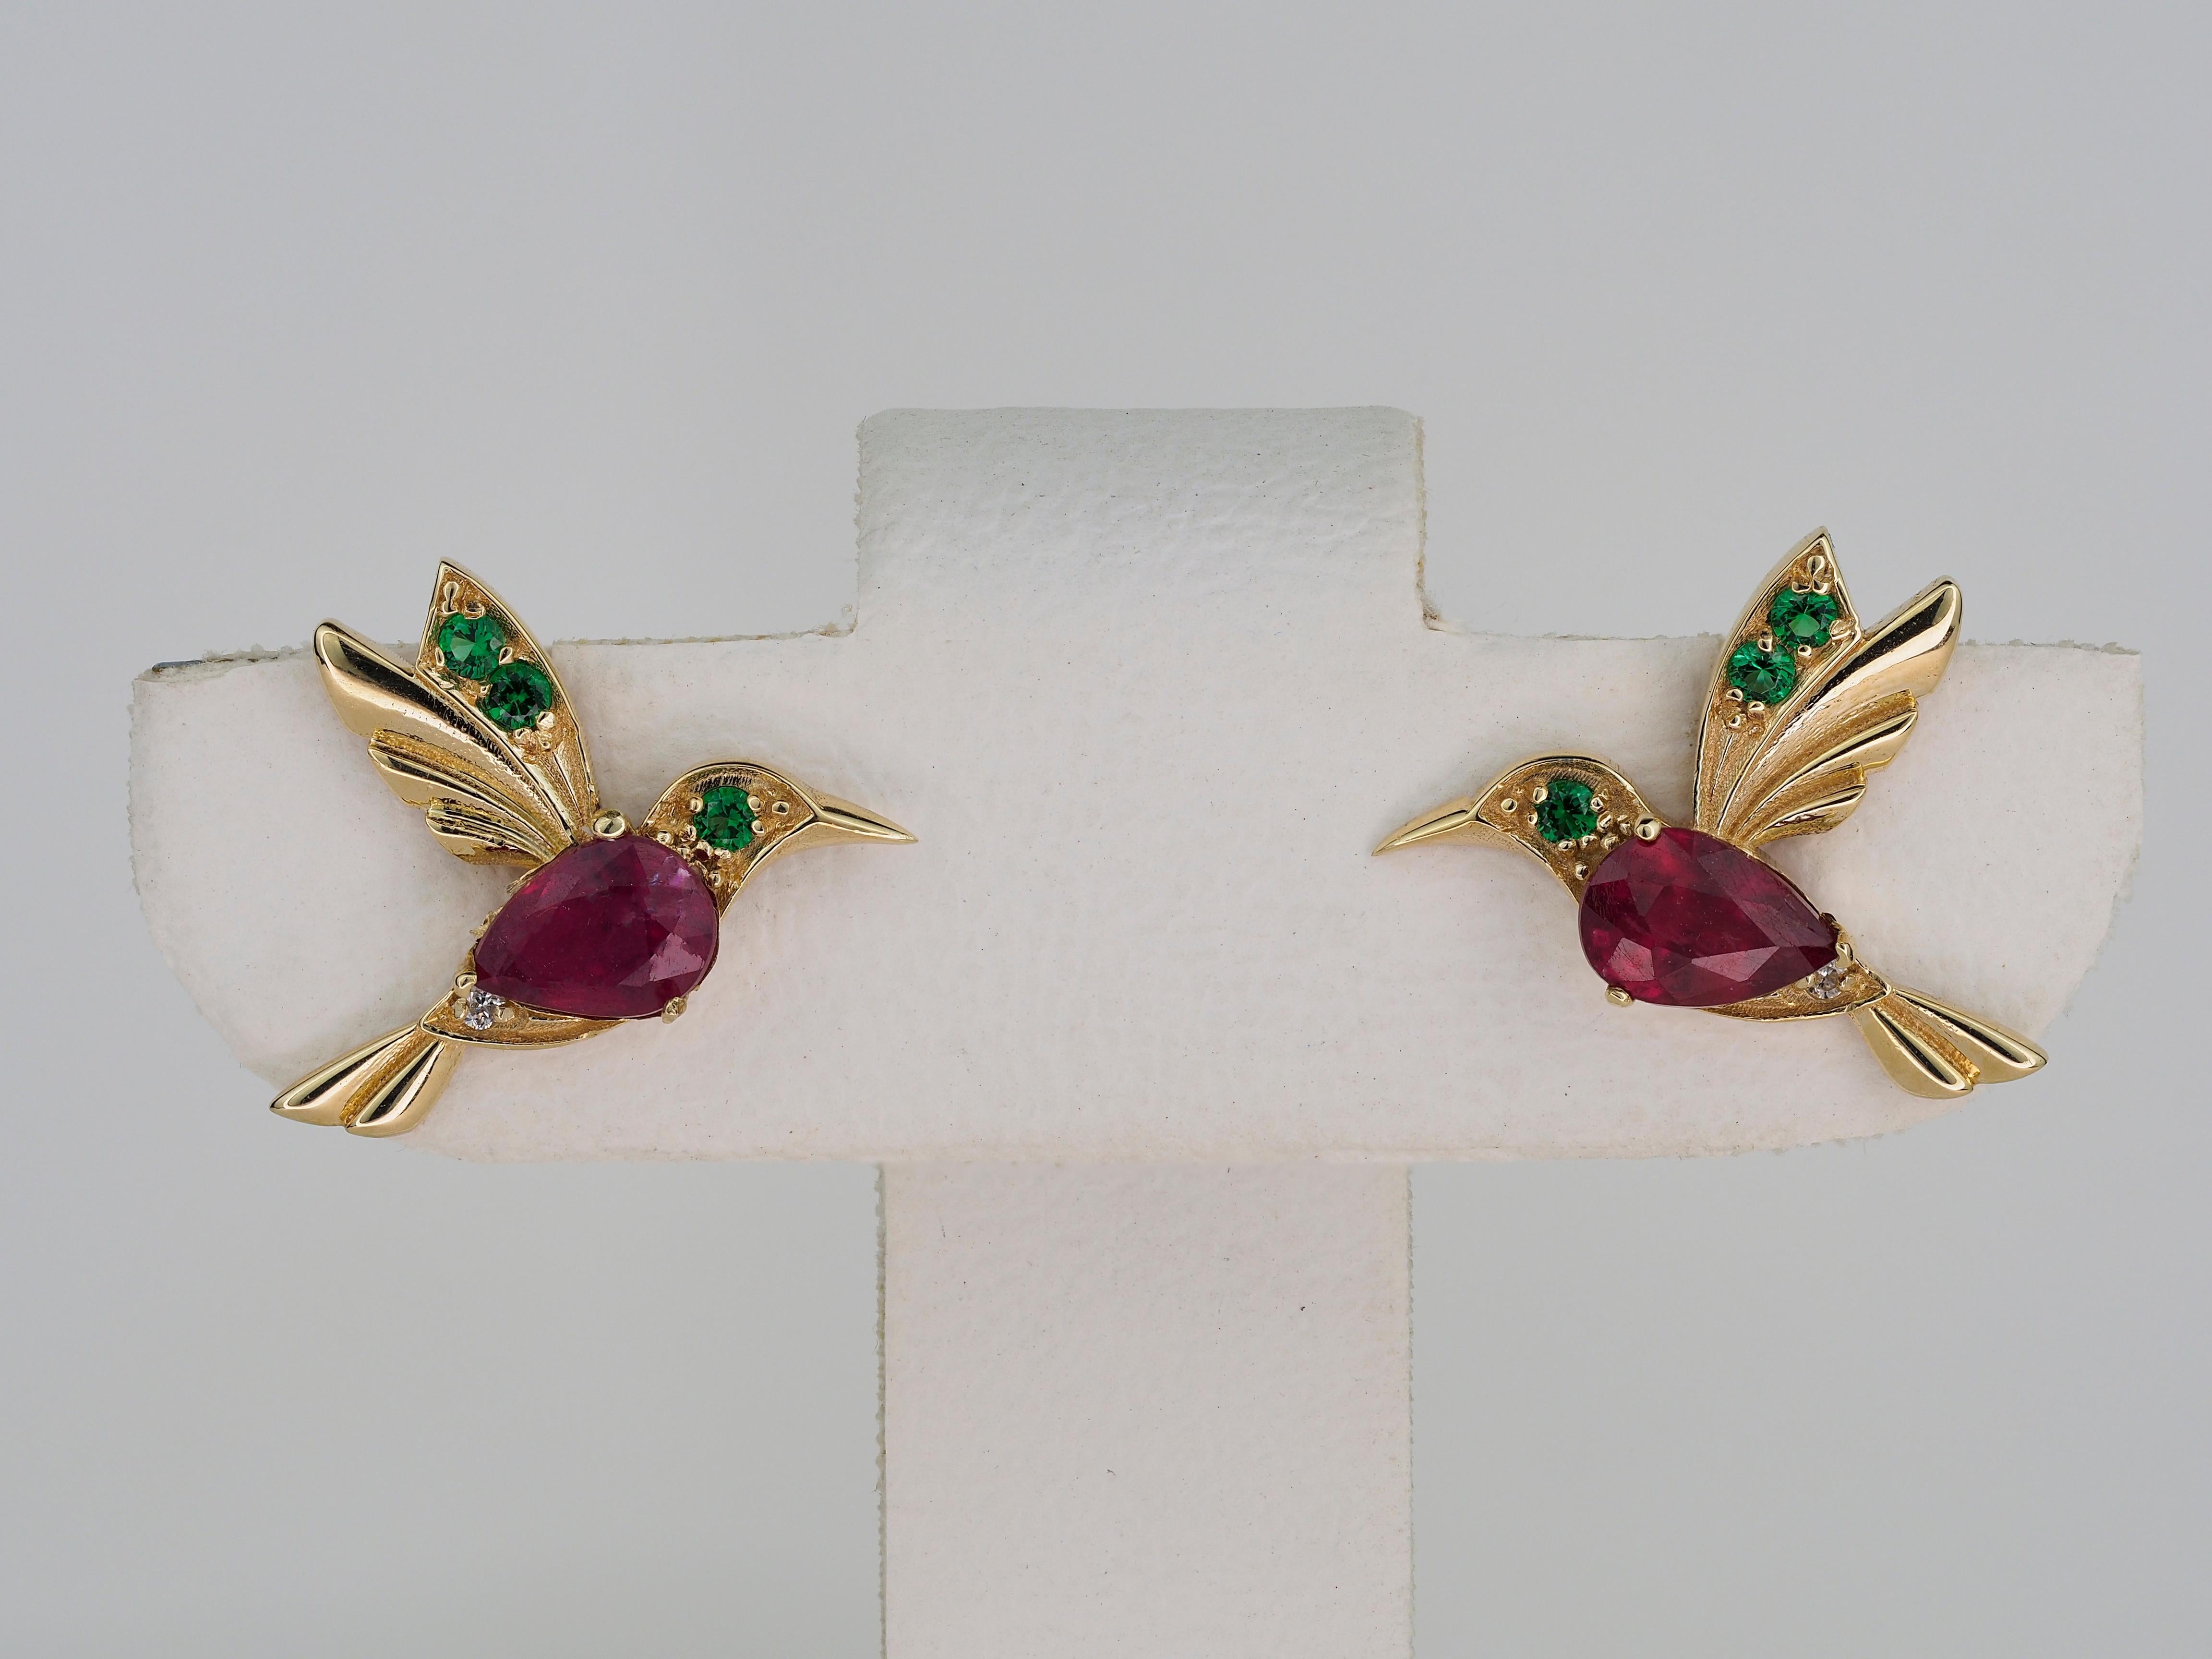 14k Gold Hummingbird Earings Studs with Rubies, Bird Stud Earrings with Gems ! For Sale 3